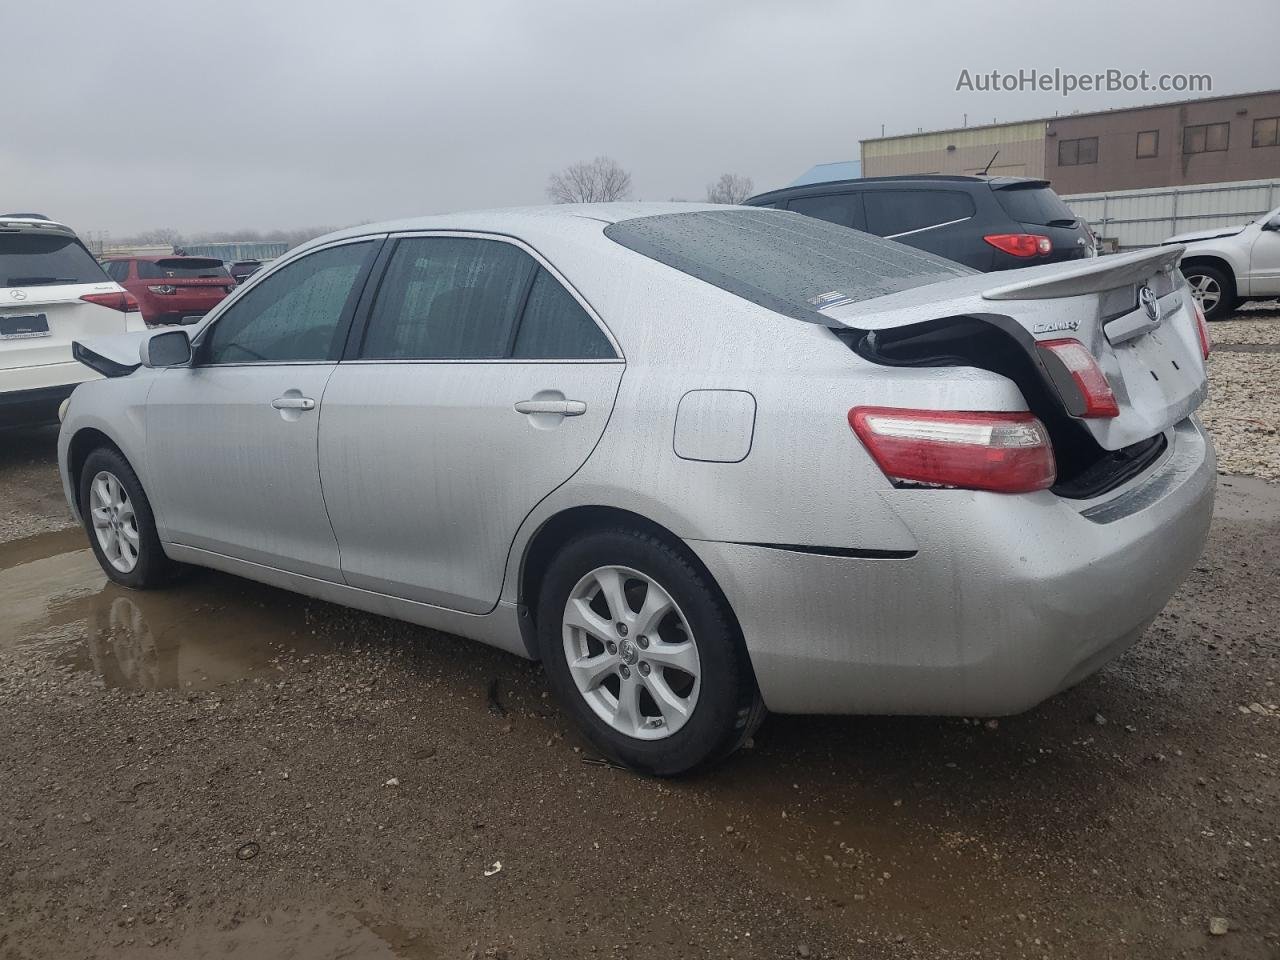 2009 Toyota Camry Base Silver vin: 4T4BE46K59R073480